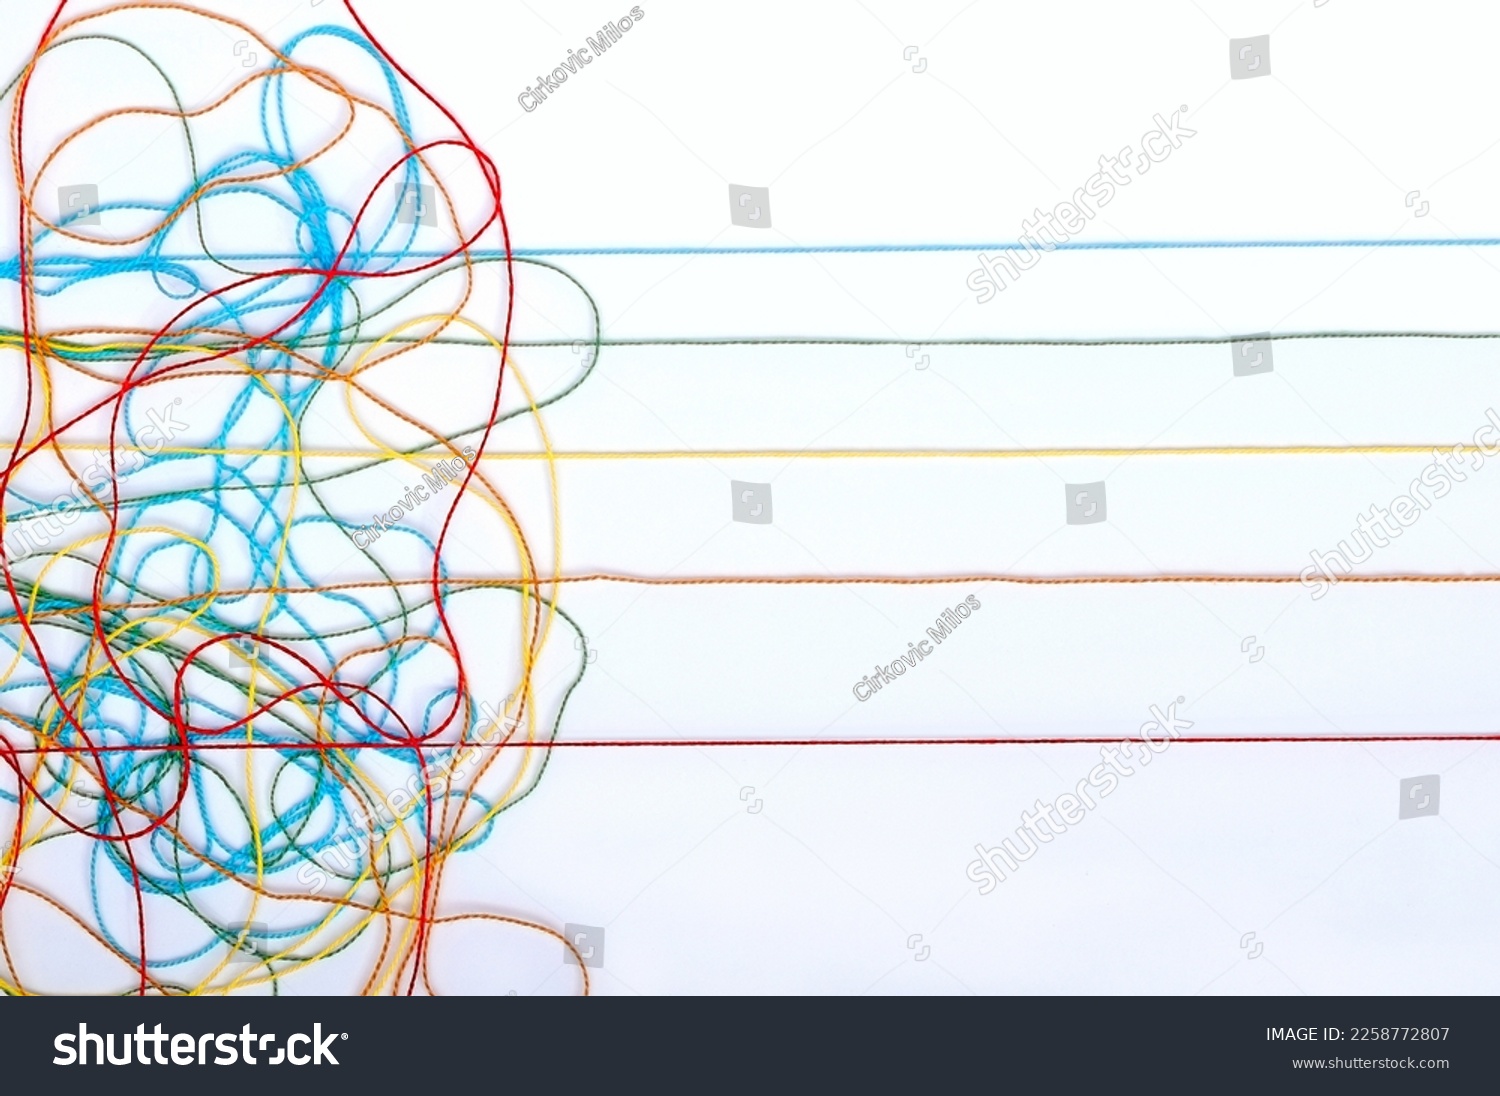 Multicolored tangled knitting threads on a white background #2258772807